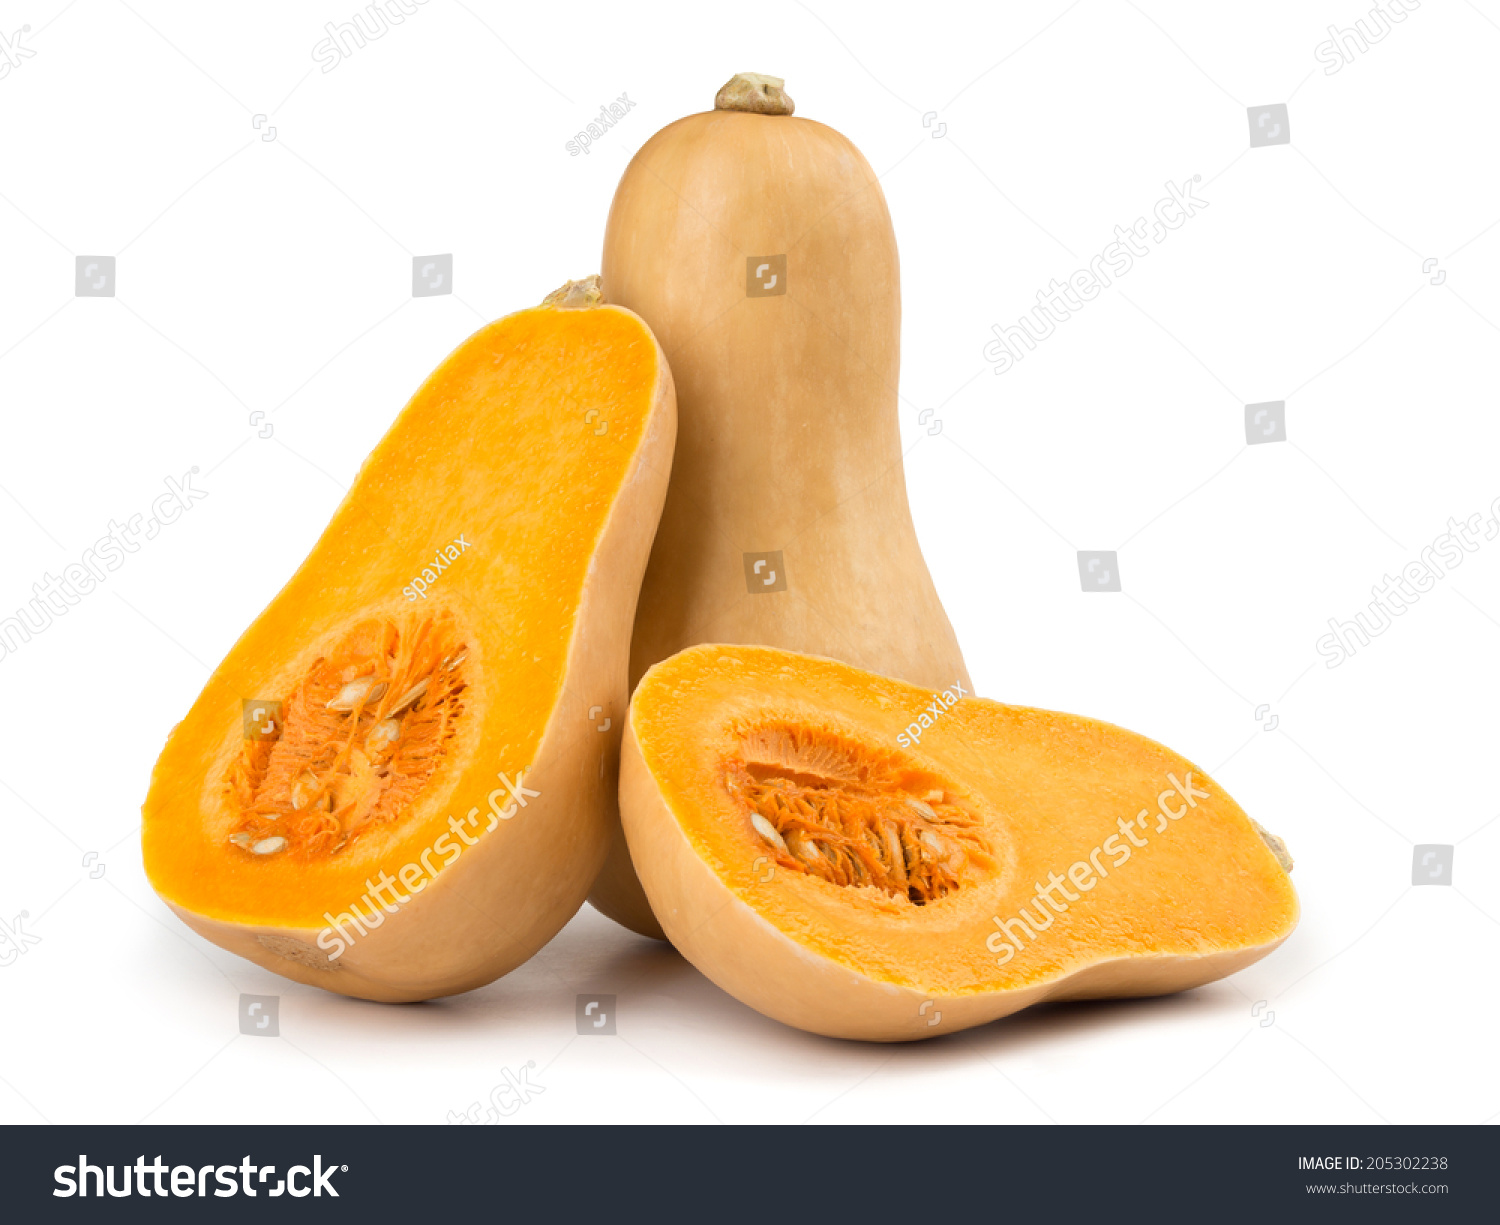 Butternut squash isolated on white background #205302238